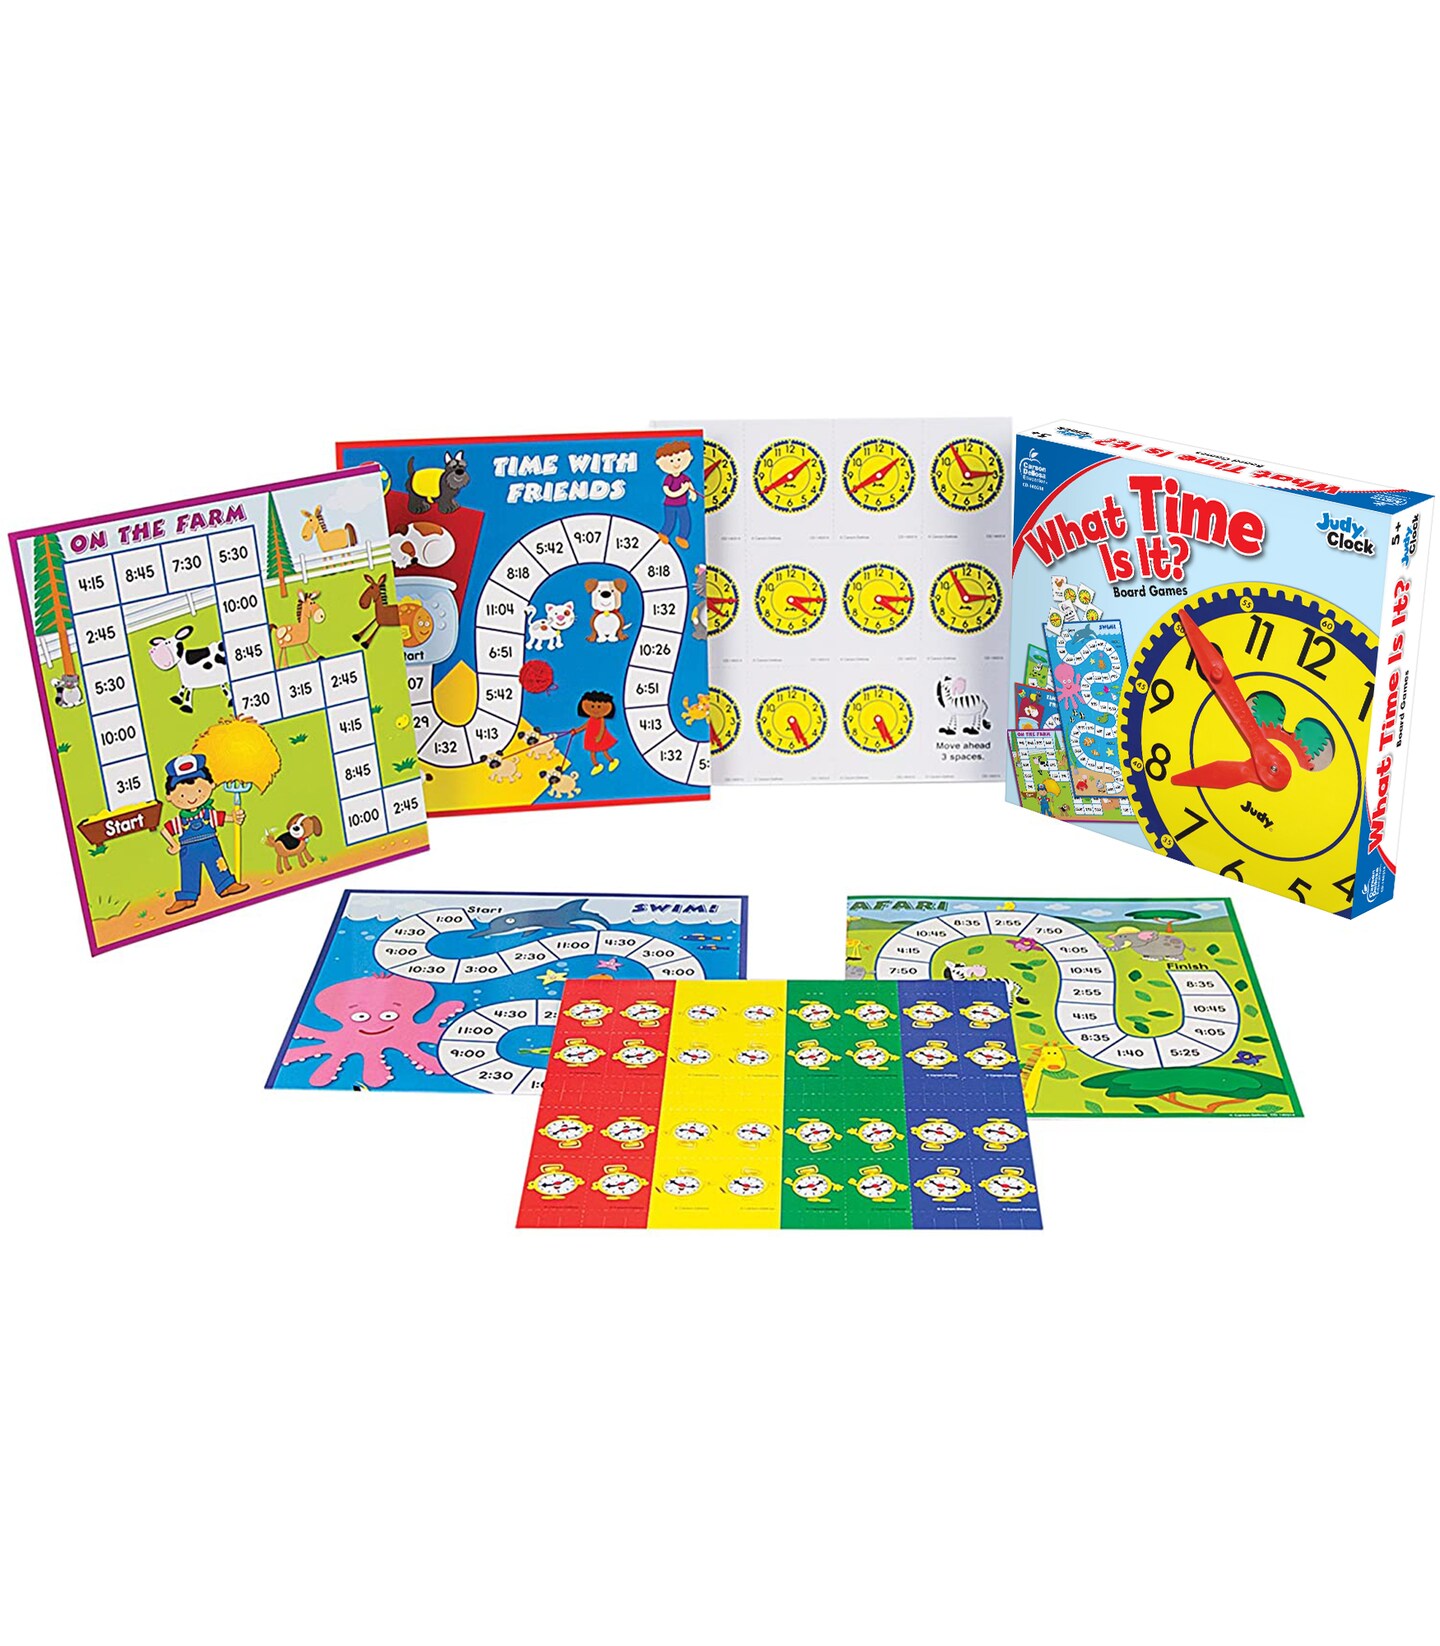 Carson Dellosa What Time Is It? Judy Clock Teaching Time Board Game, 4 Educational Games for Telling Time, Kindergarten and Elementary Board Games for Kids Ages 5+